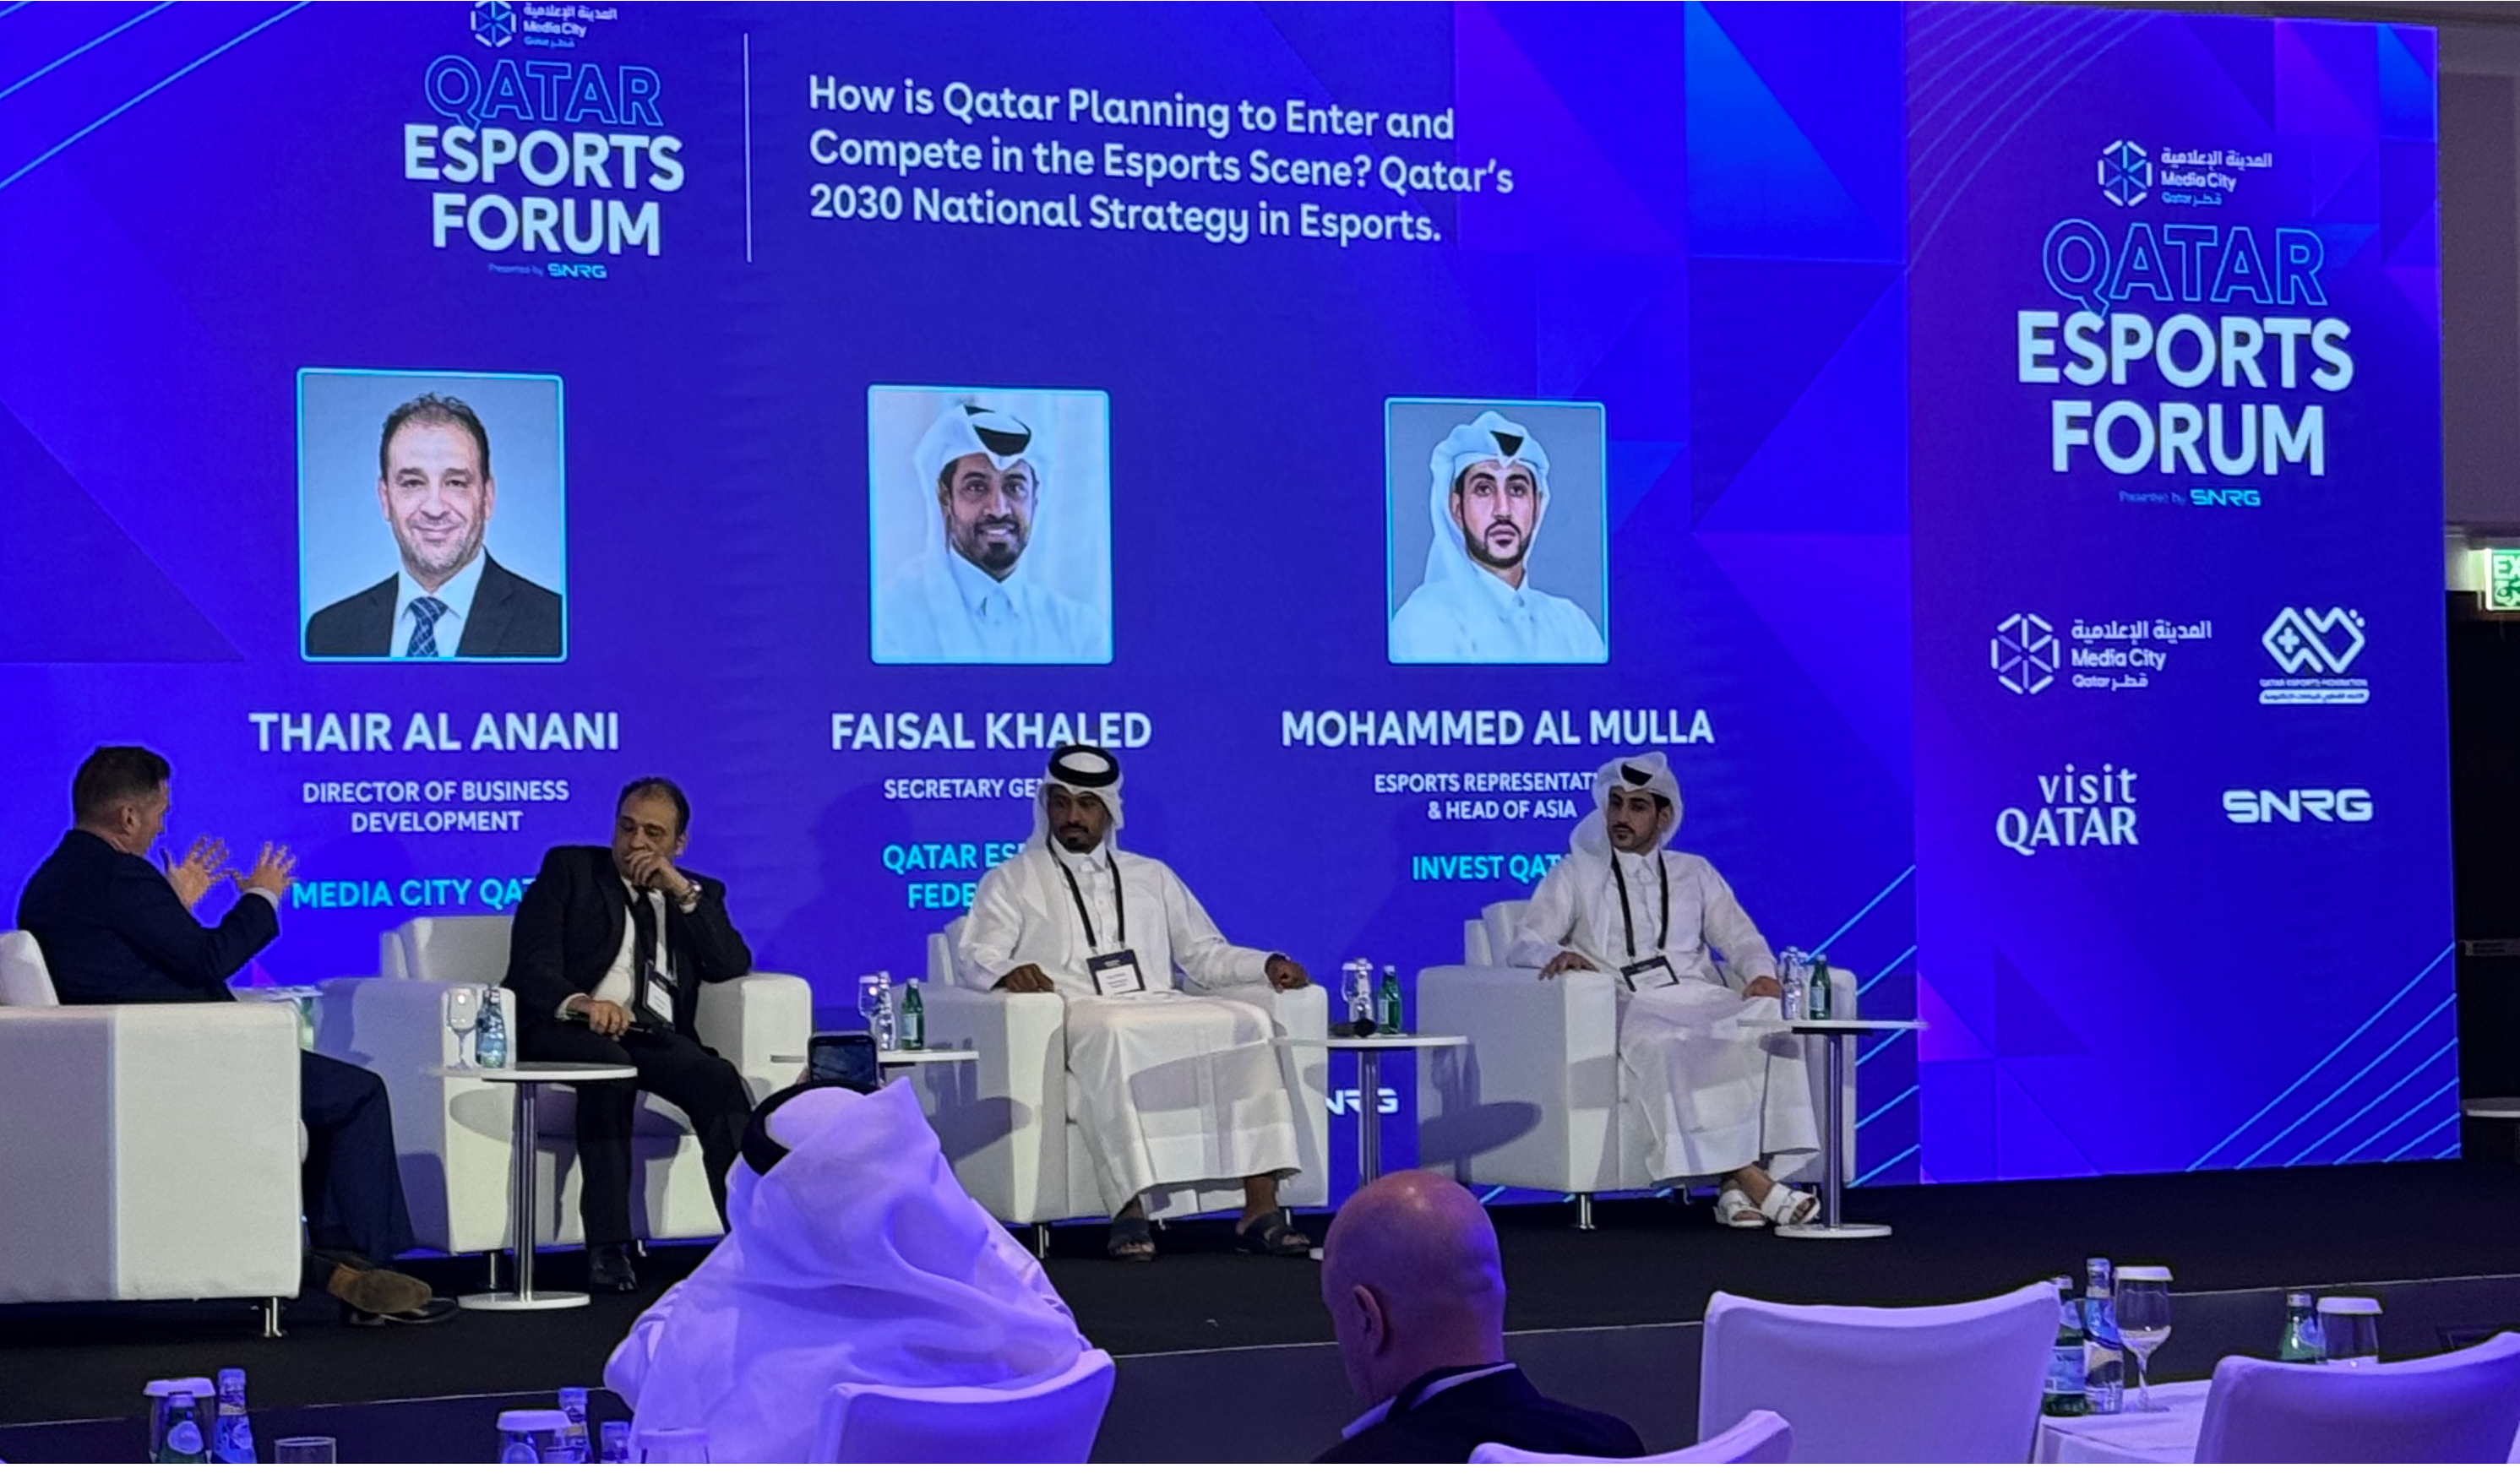 Officials at Qatar Esports Forum are on a mission to enter the global gaming stage